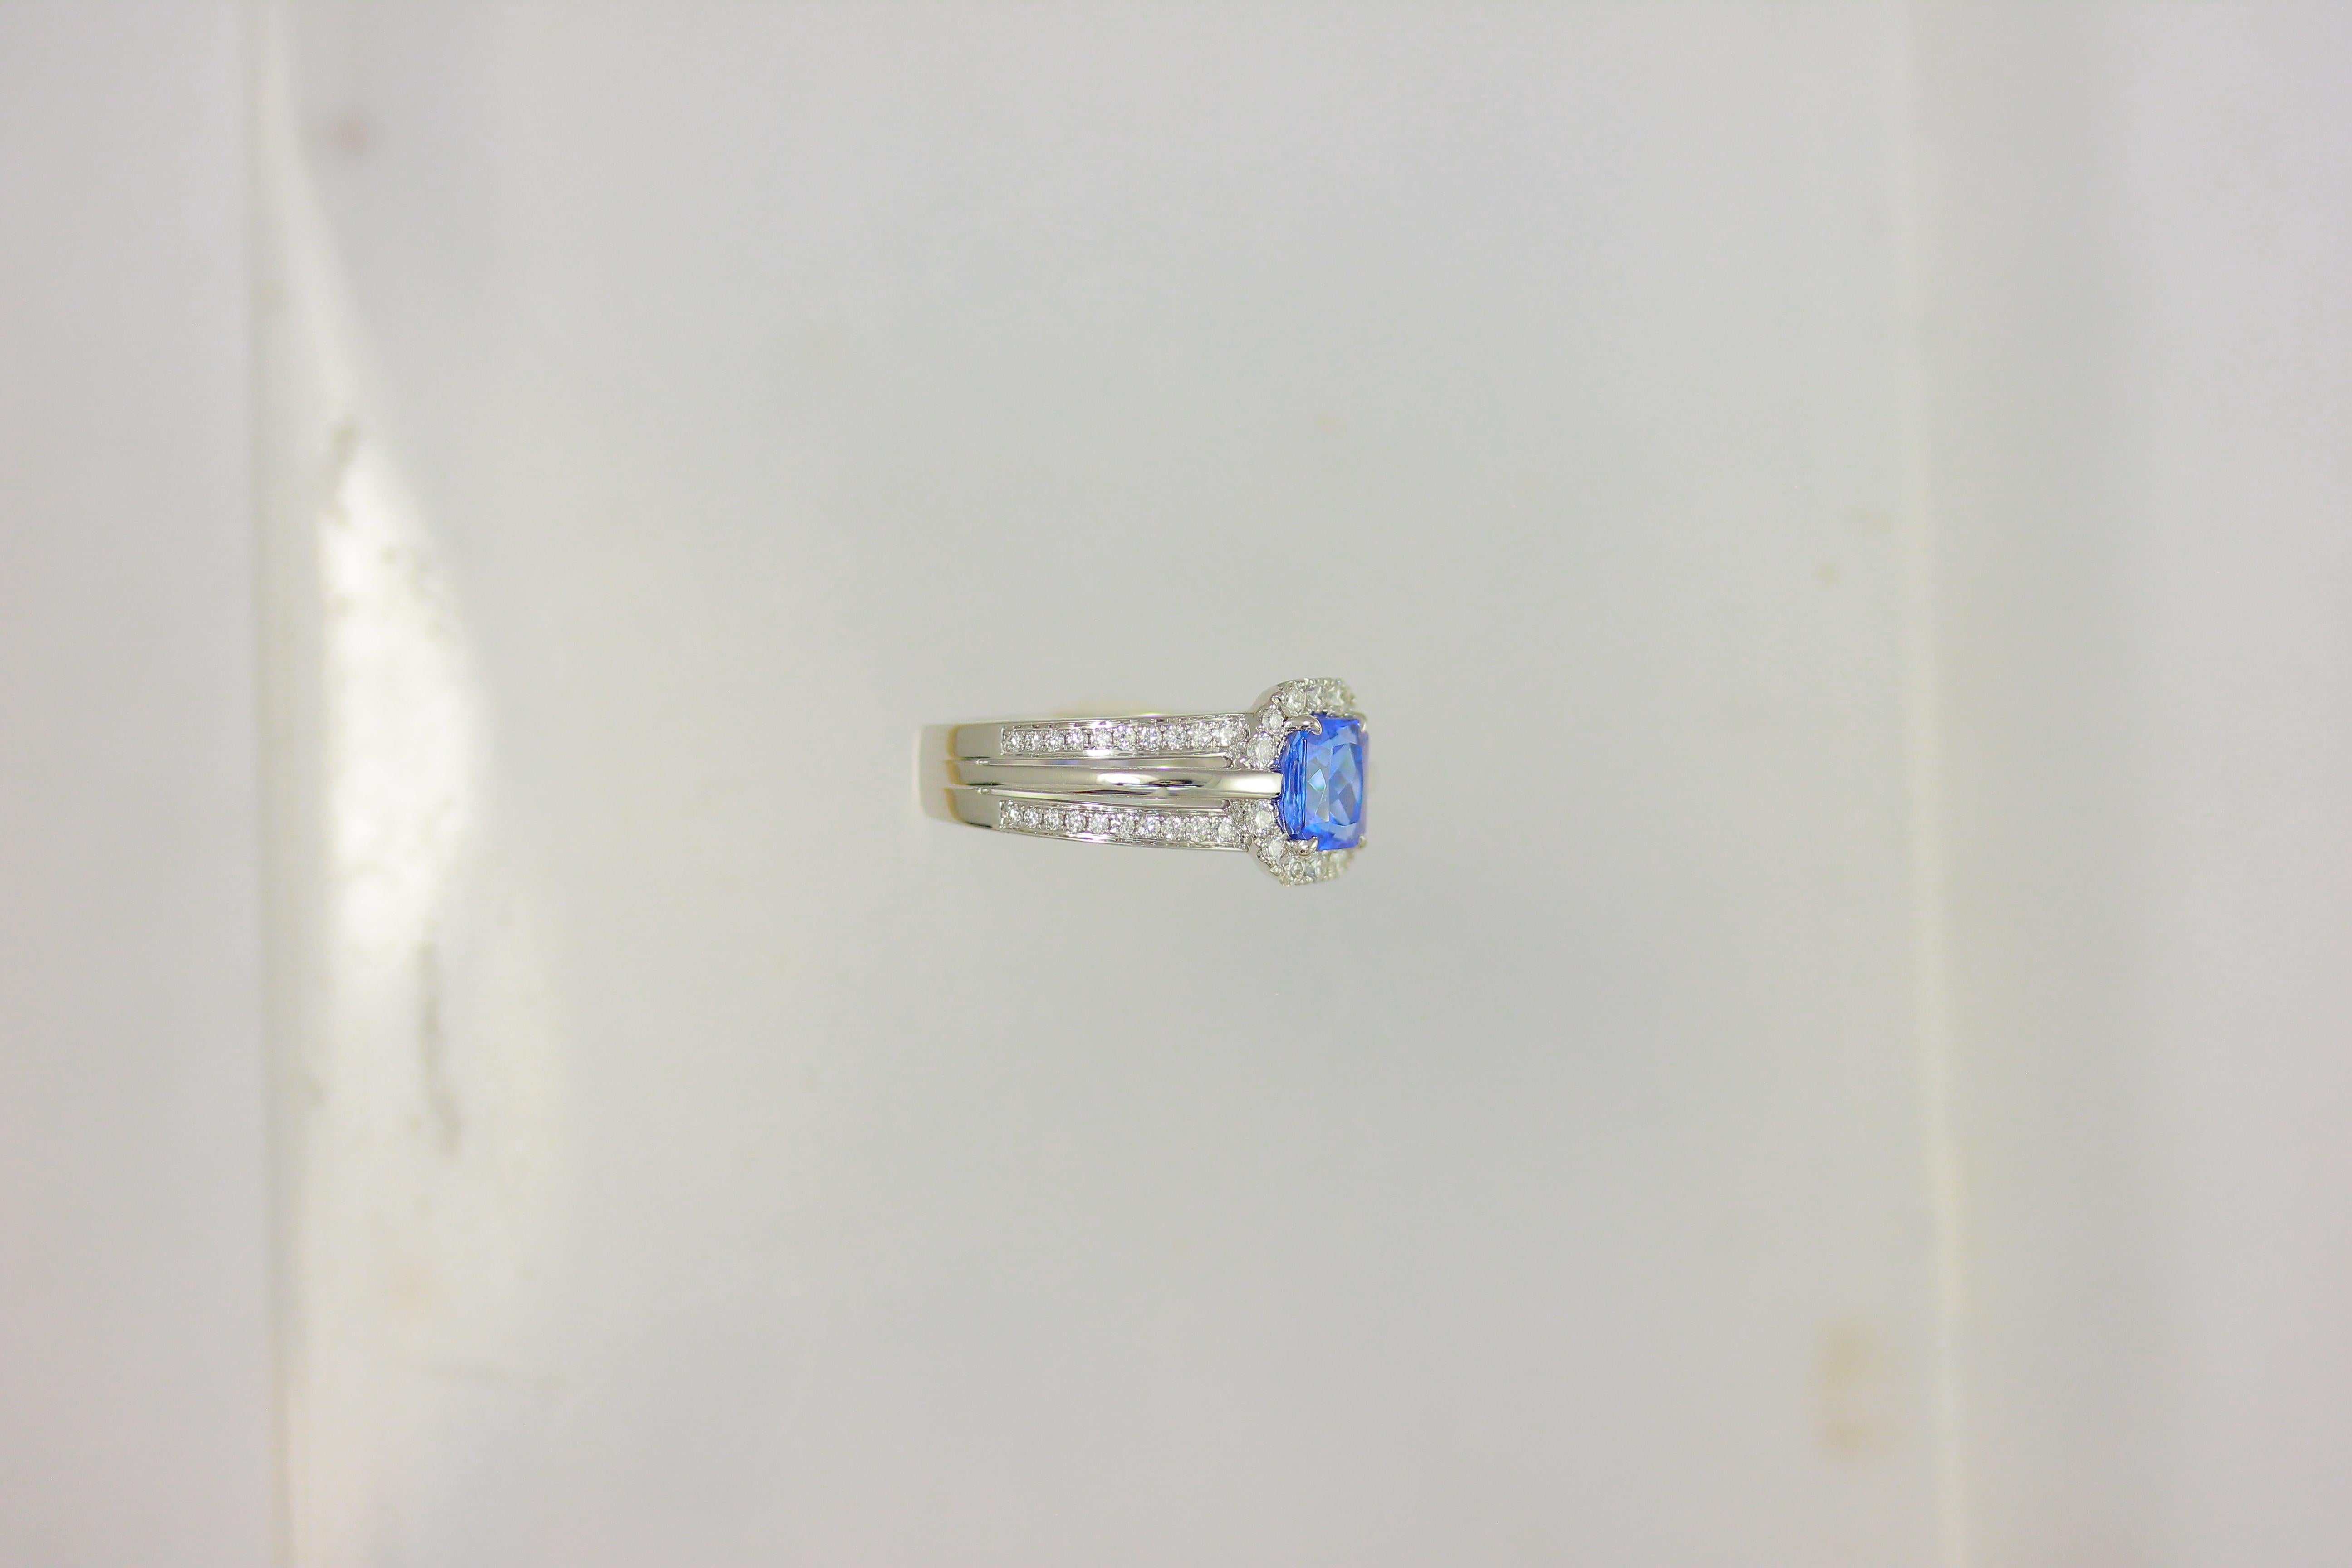 14K White Gold Tanzanite Center White Diamond Outside and Polished Inside Reverse Eclipse One of Kind Bridal Engagement Cocktail Ring

Center Tanzanite weight: 1.35 ct
Total diamond count: 54
Total diamond weight: 0.49 CT